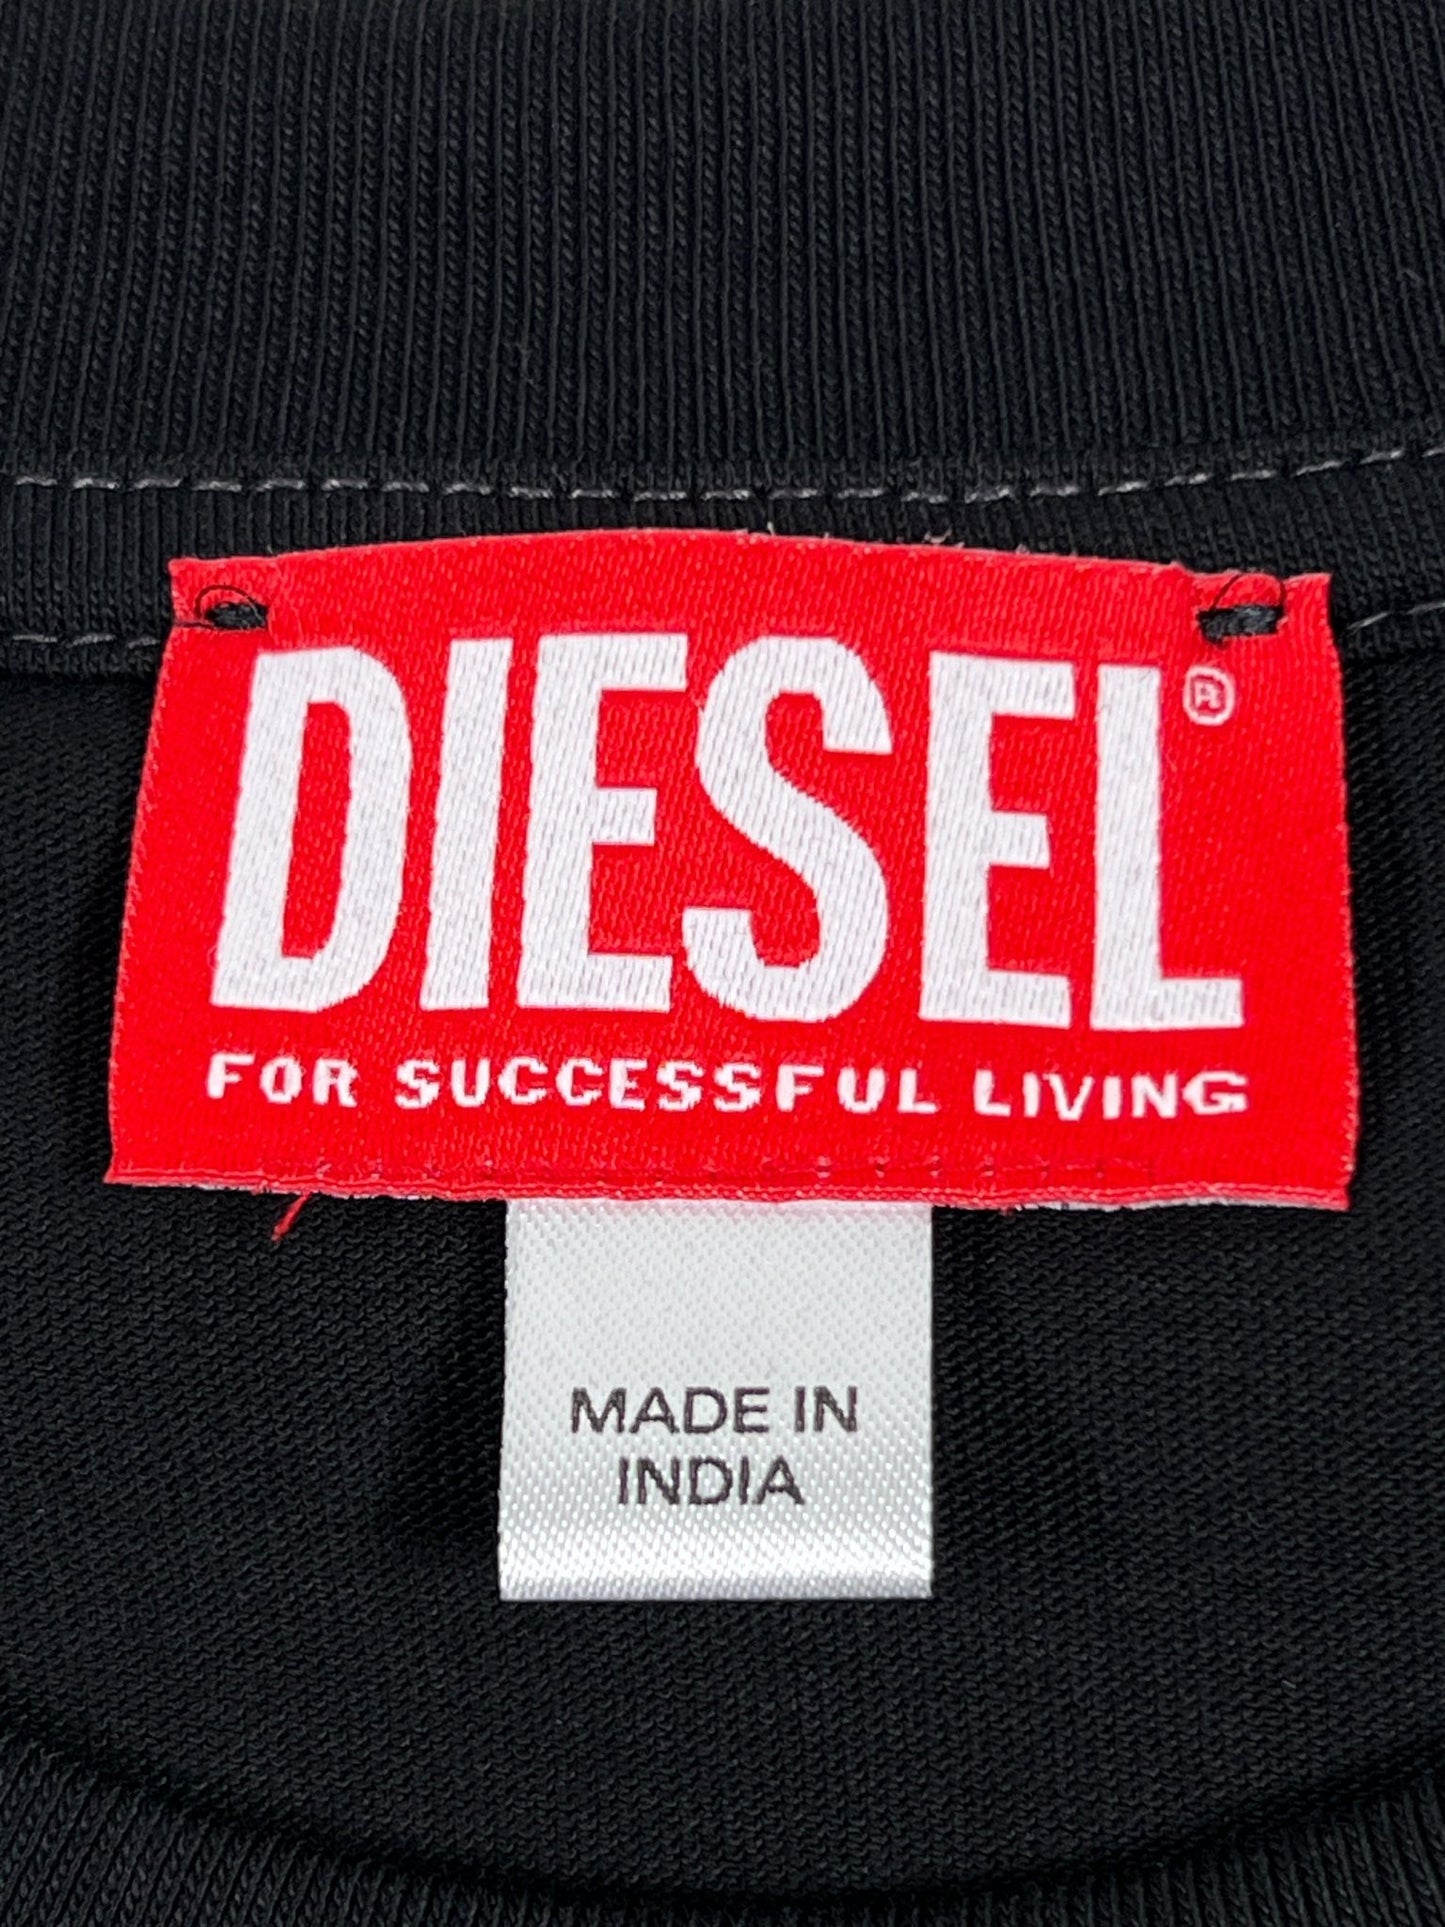 Red and white iconic Diesel logos brand label on a black textile background with a "made in India" tag below.